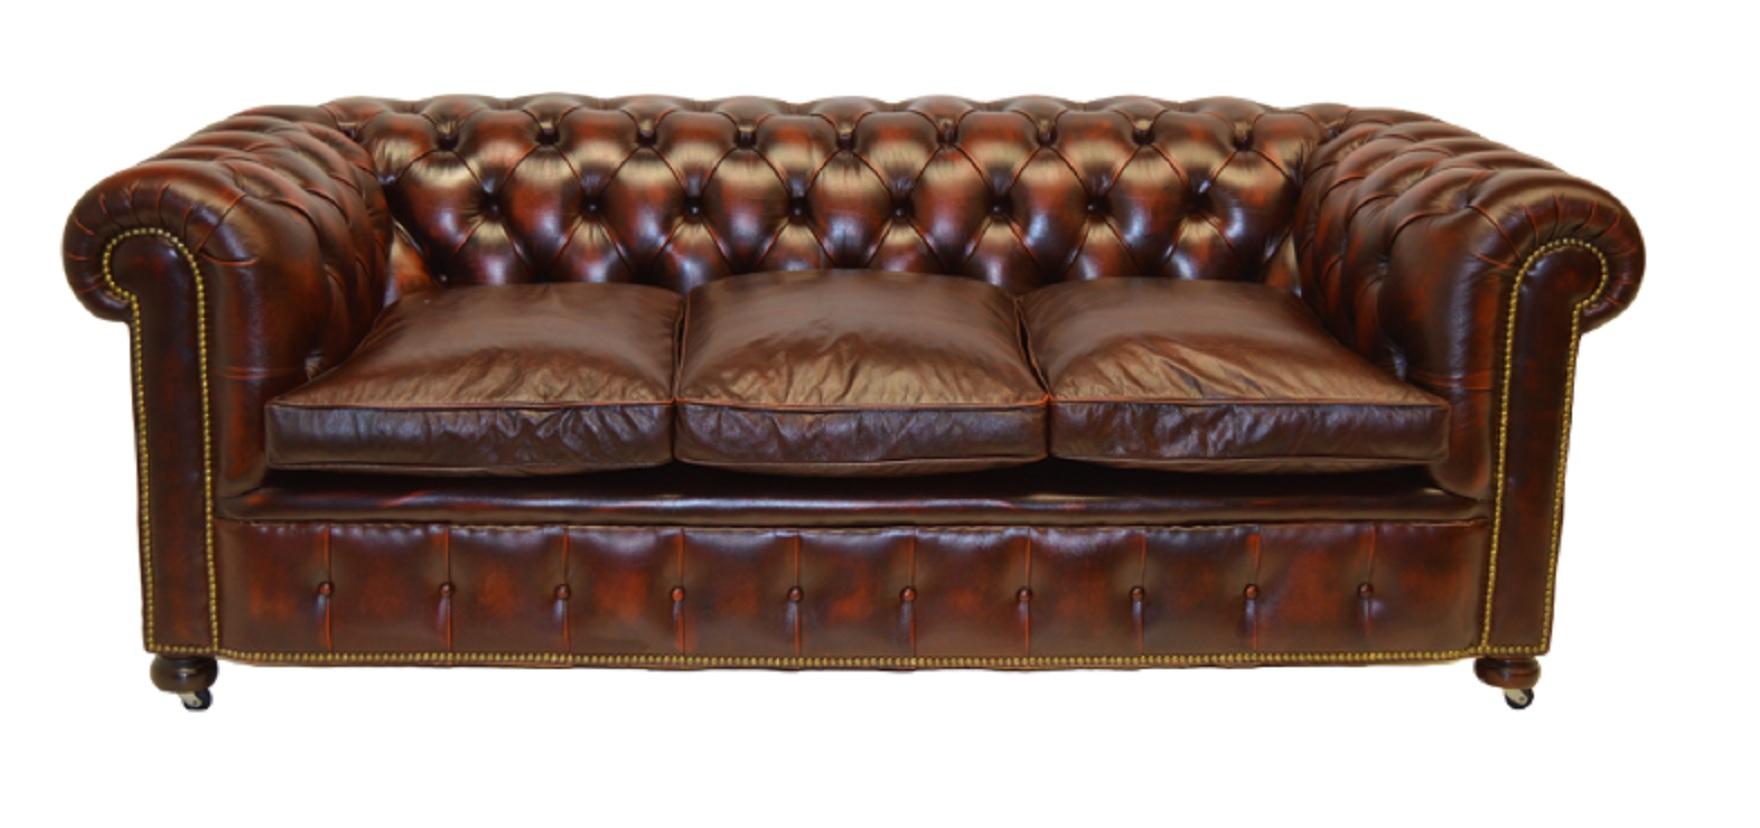 Antique Tan Chesterfield Sofa with Brass Castors / Wheels For Sale 4